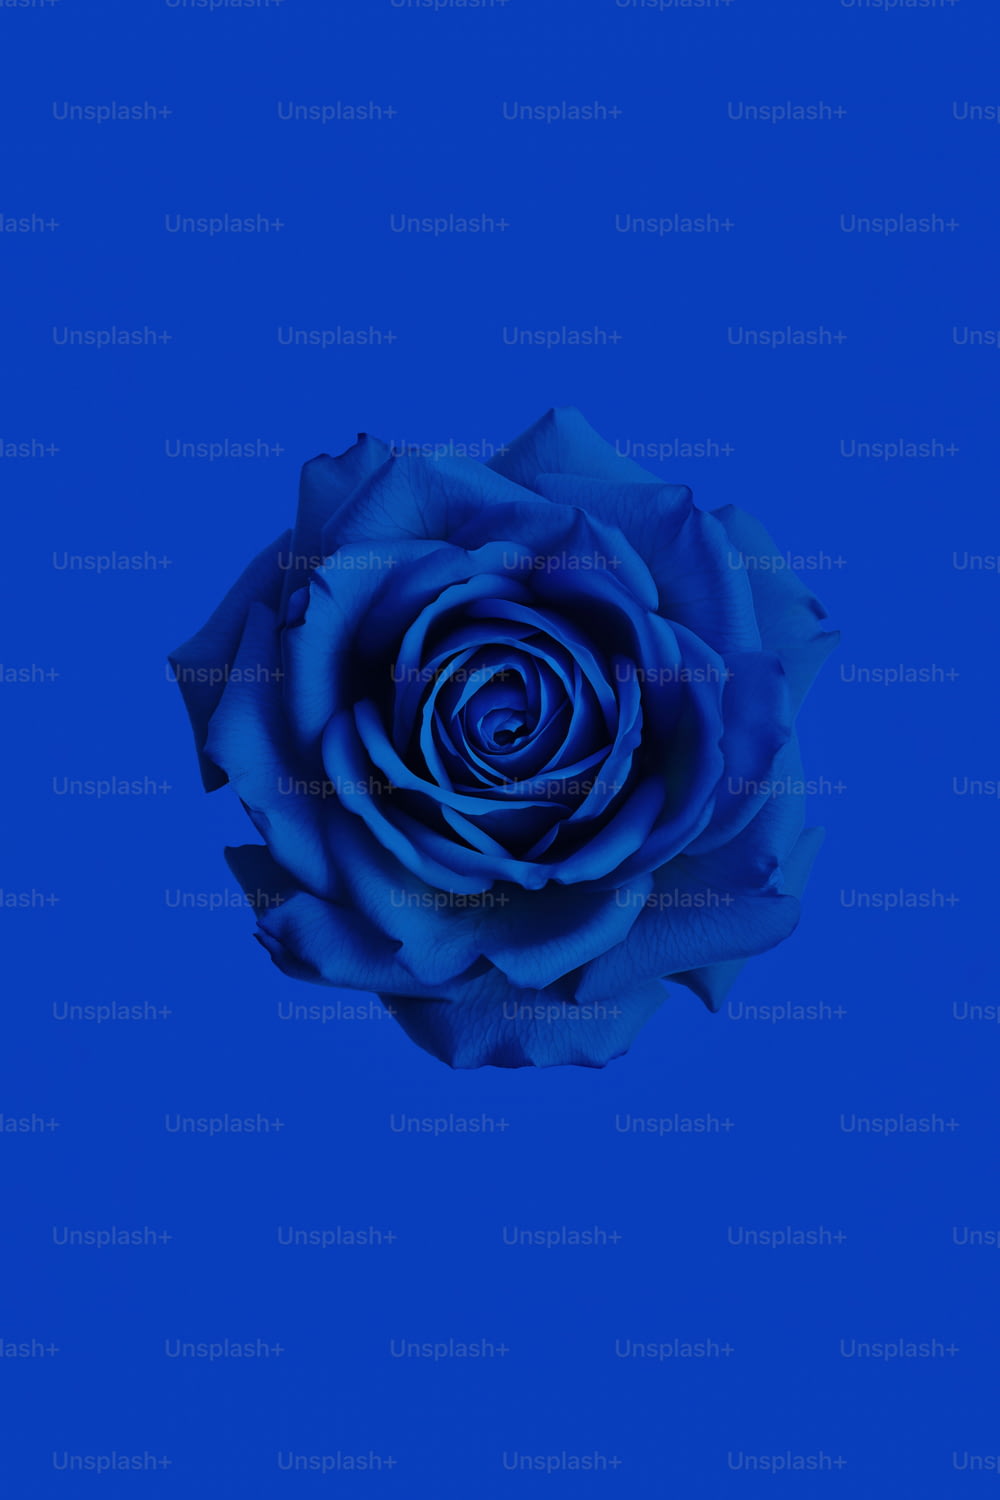 a blue rose is shown against a blue background